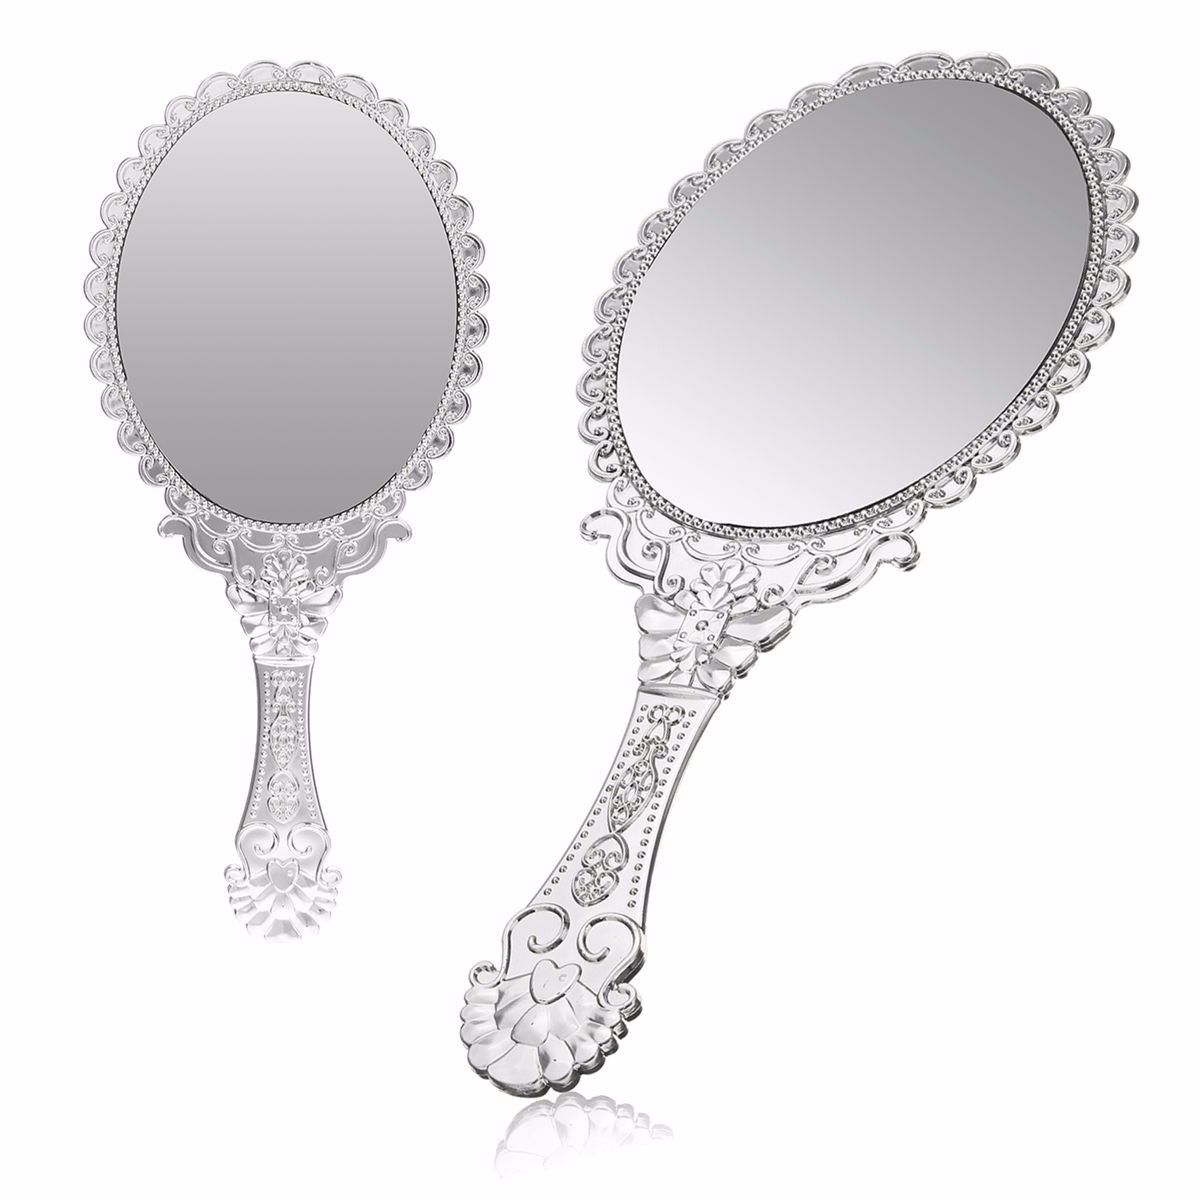 Vintage Repousse Silver Oval Makeup Floral Mirror Hand Held Cosmetic Mirrors | Newchic